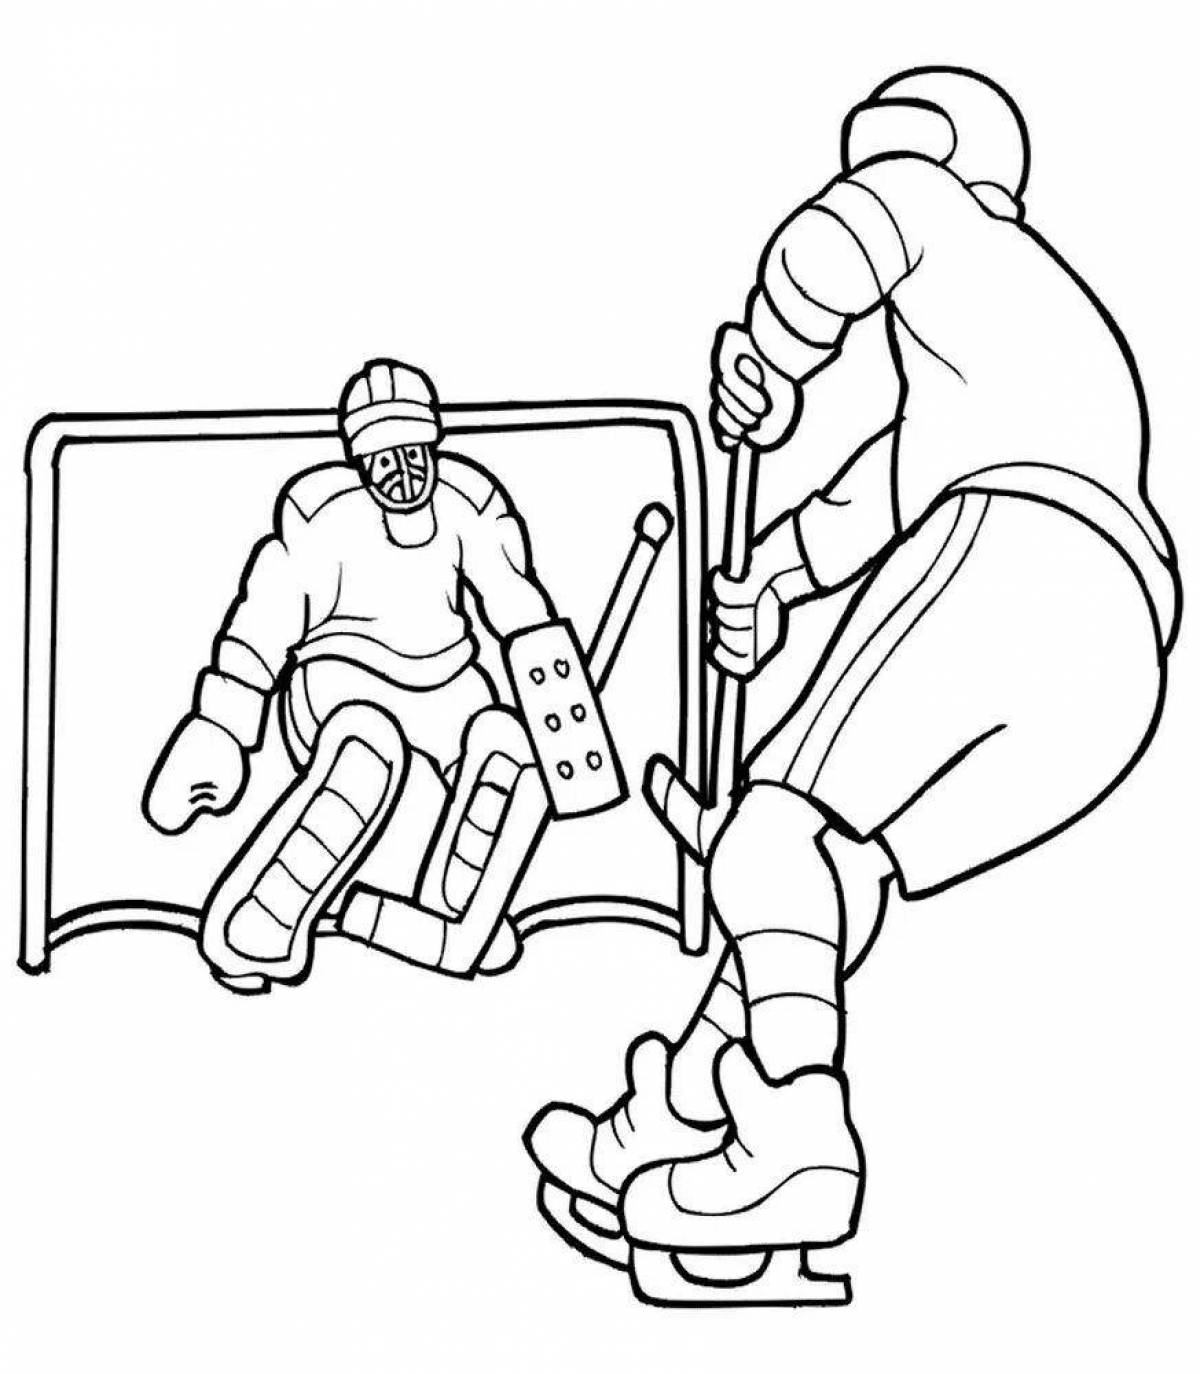 Animated hockey coloring page